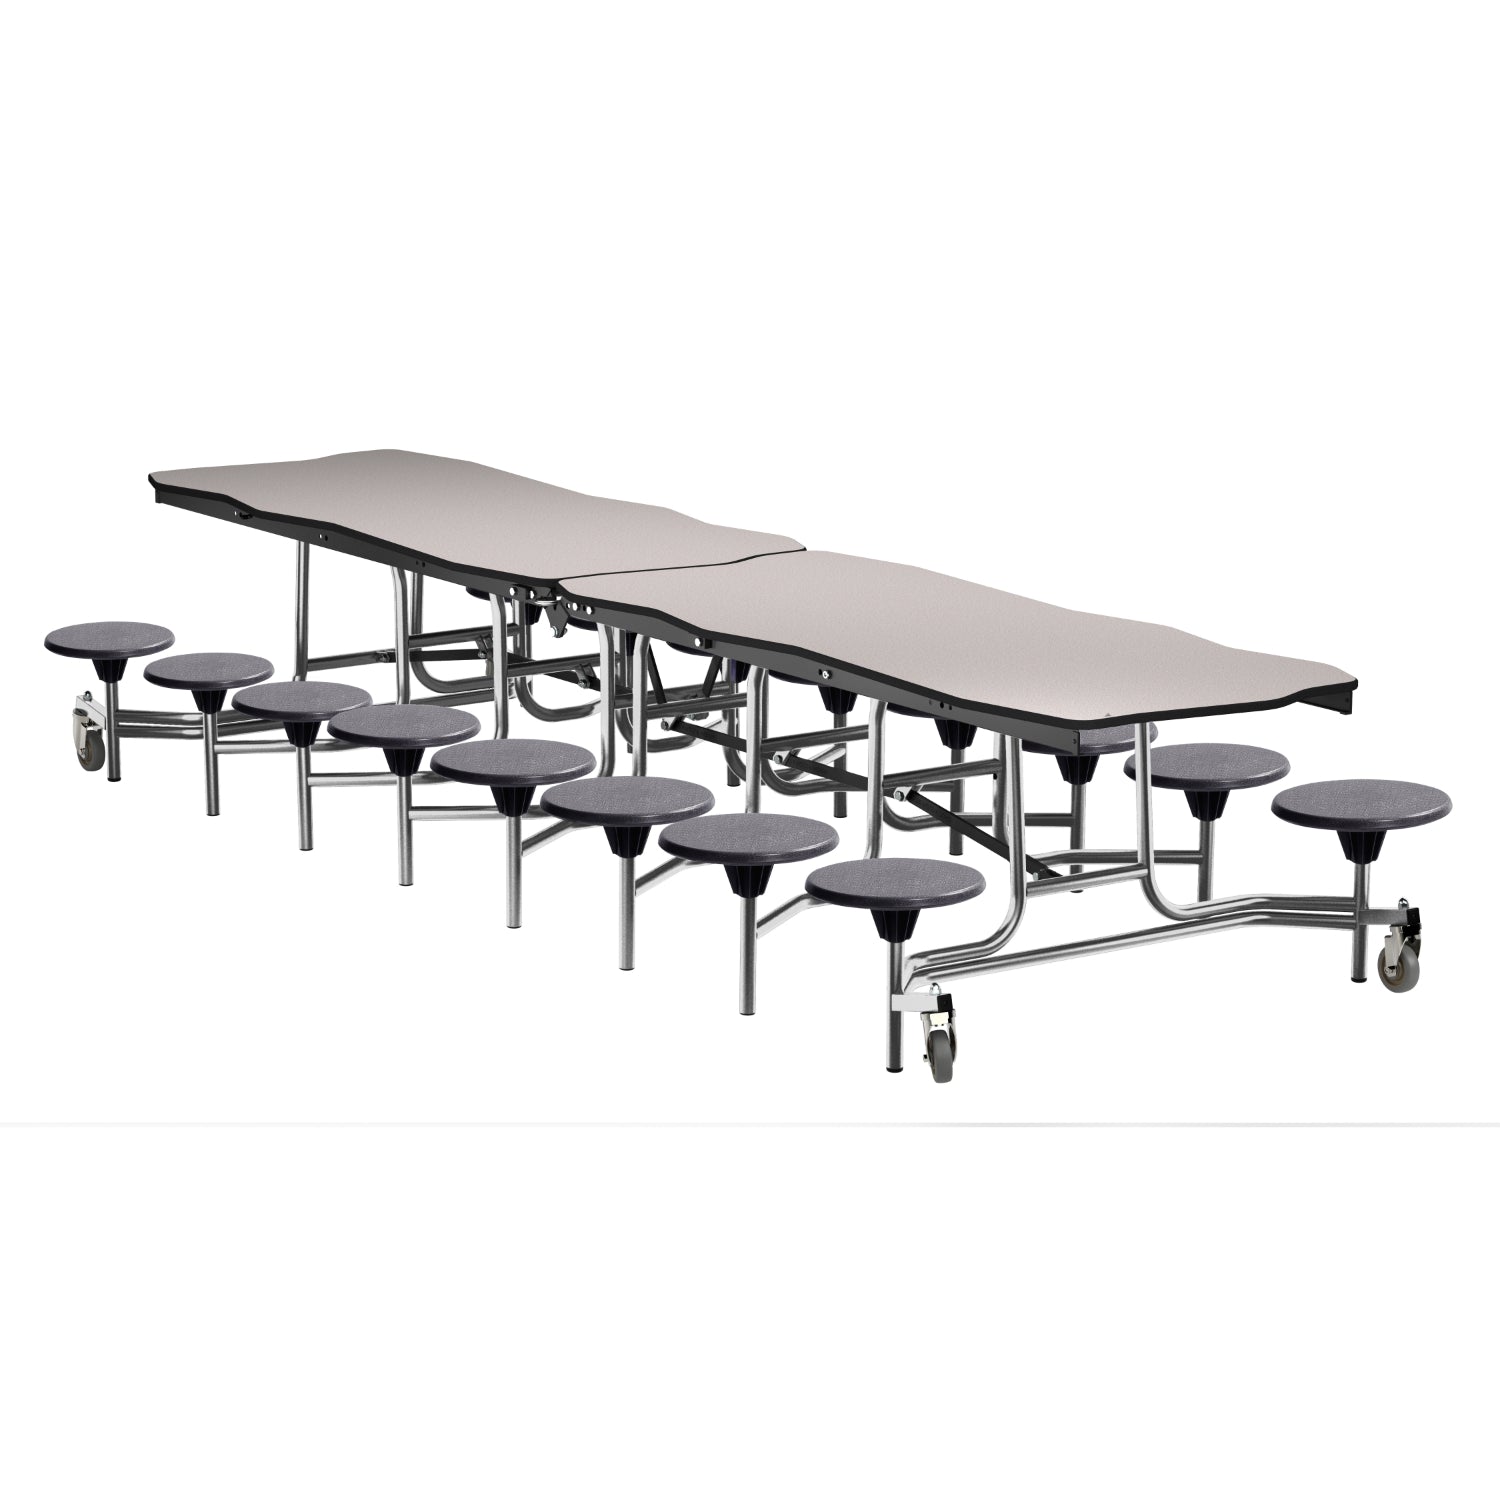 Mobile Cafeteria Table with 16 Stools, 12' Bedrock, Particleboard Core, Vinyl T-Mold Edge, Chrome Frame